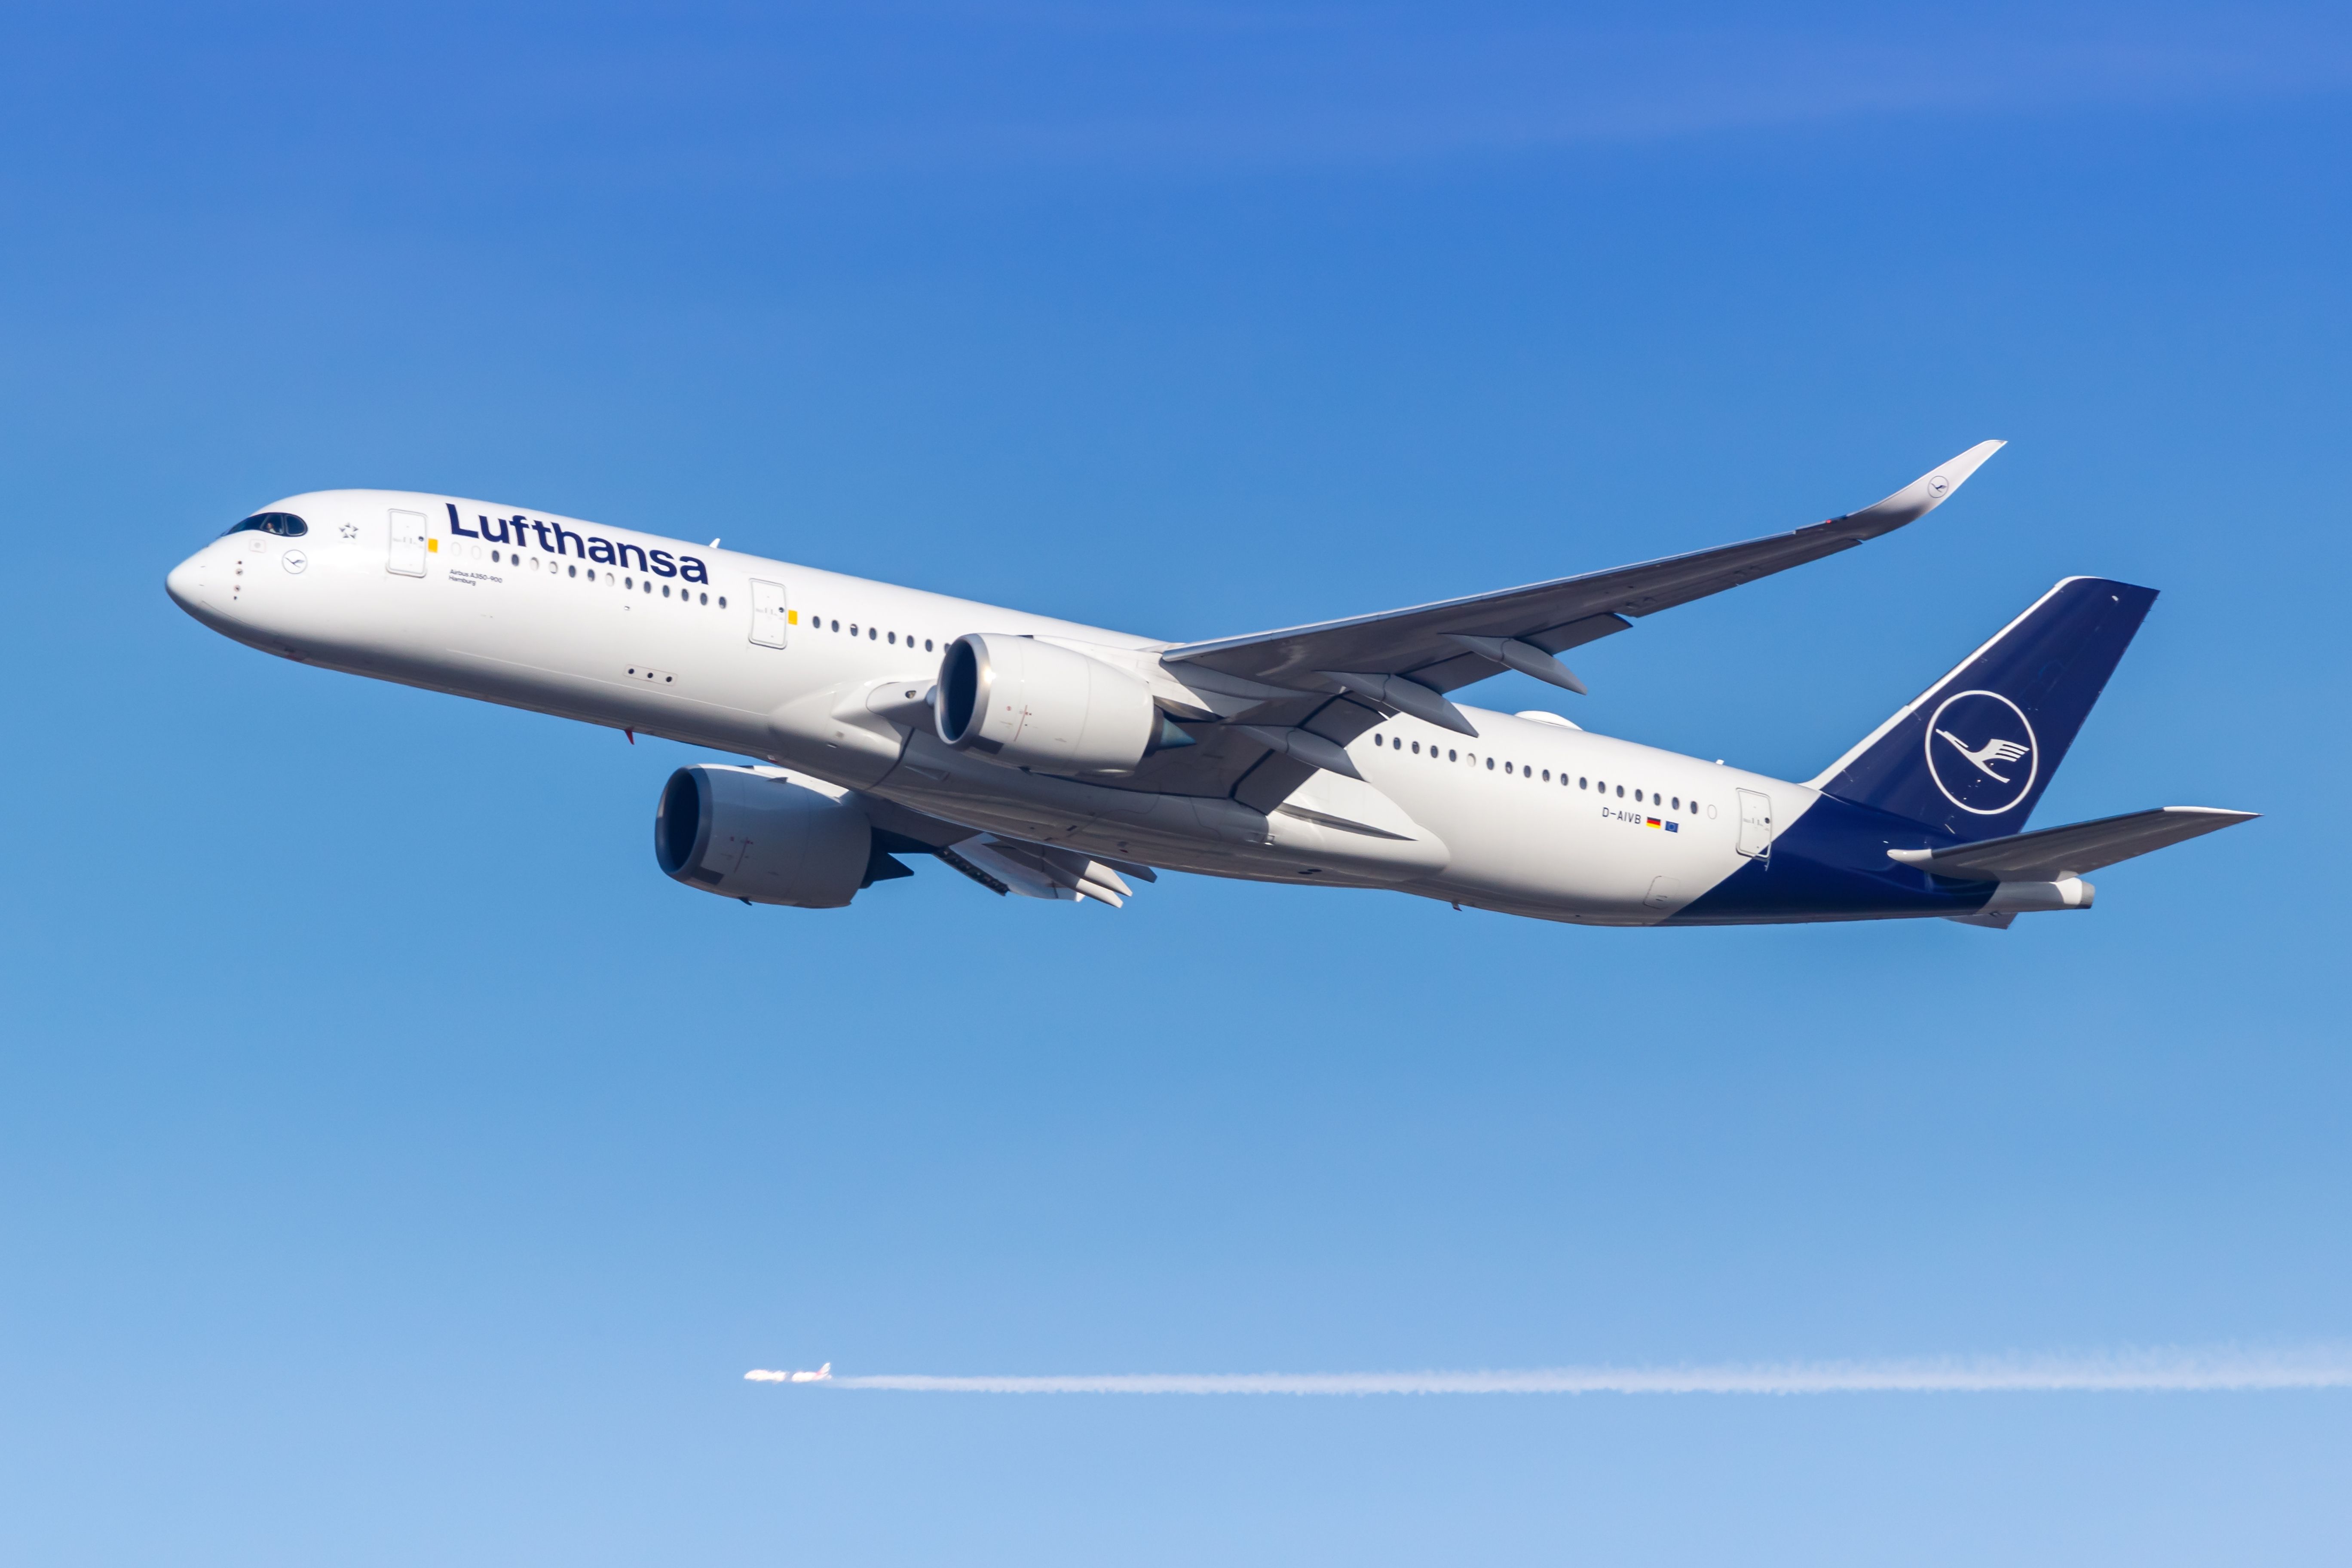 A Lufthansa Airbus A350-900 flying in the sky.